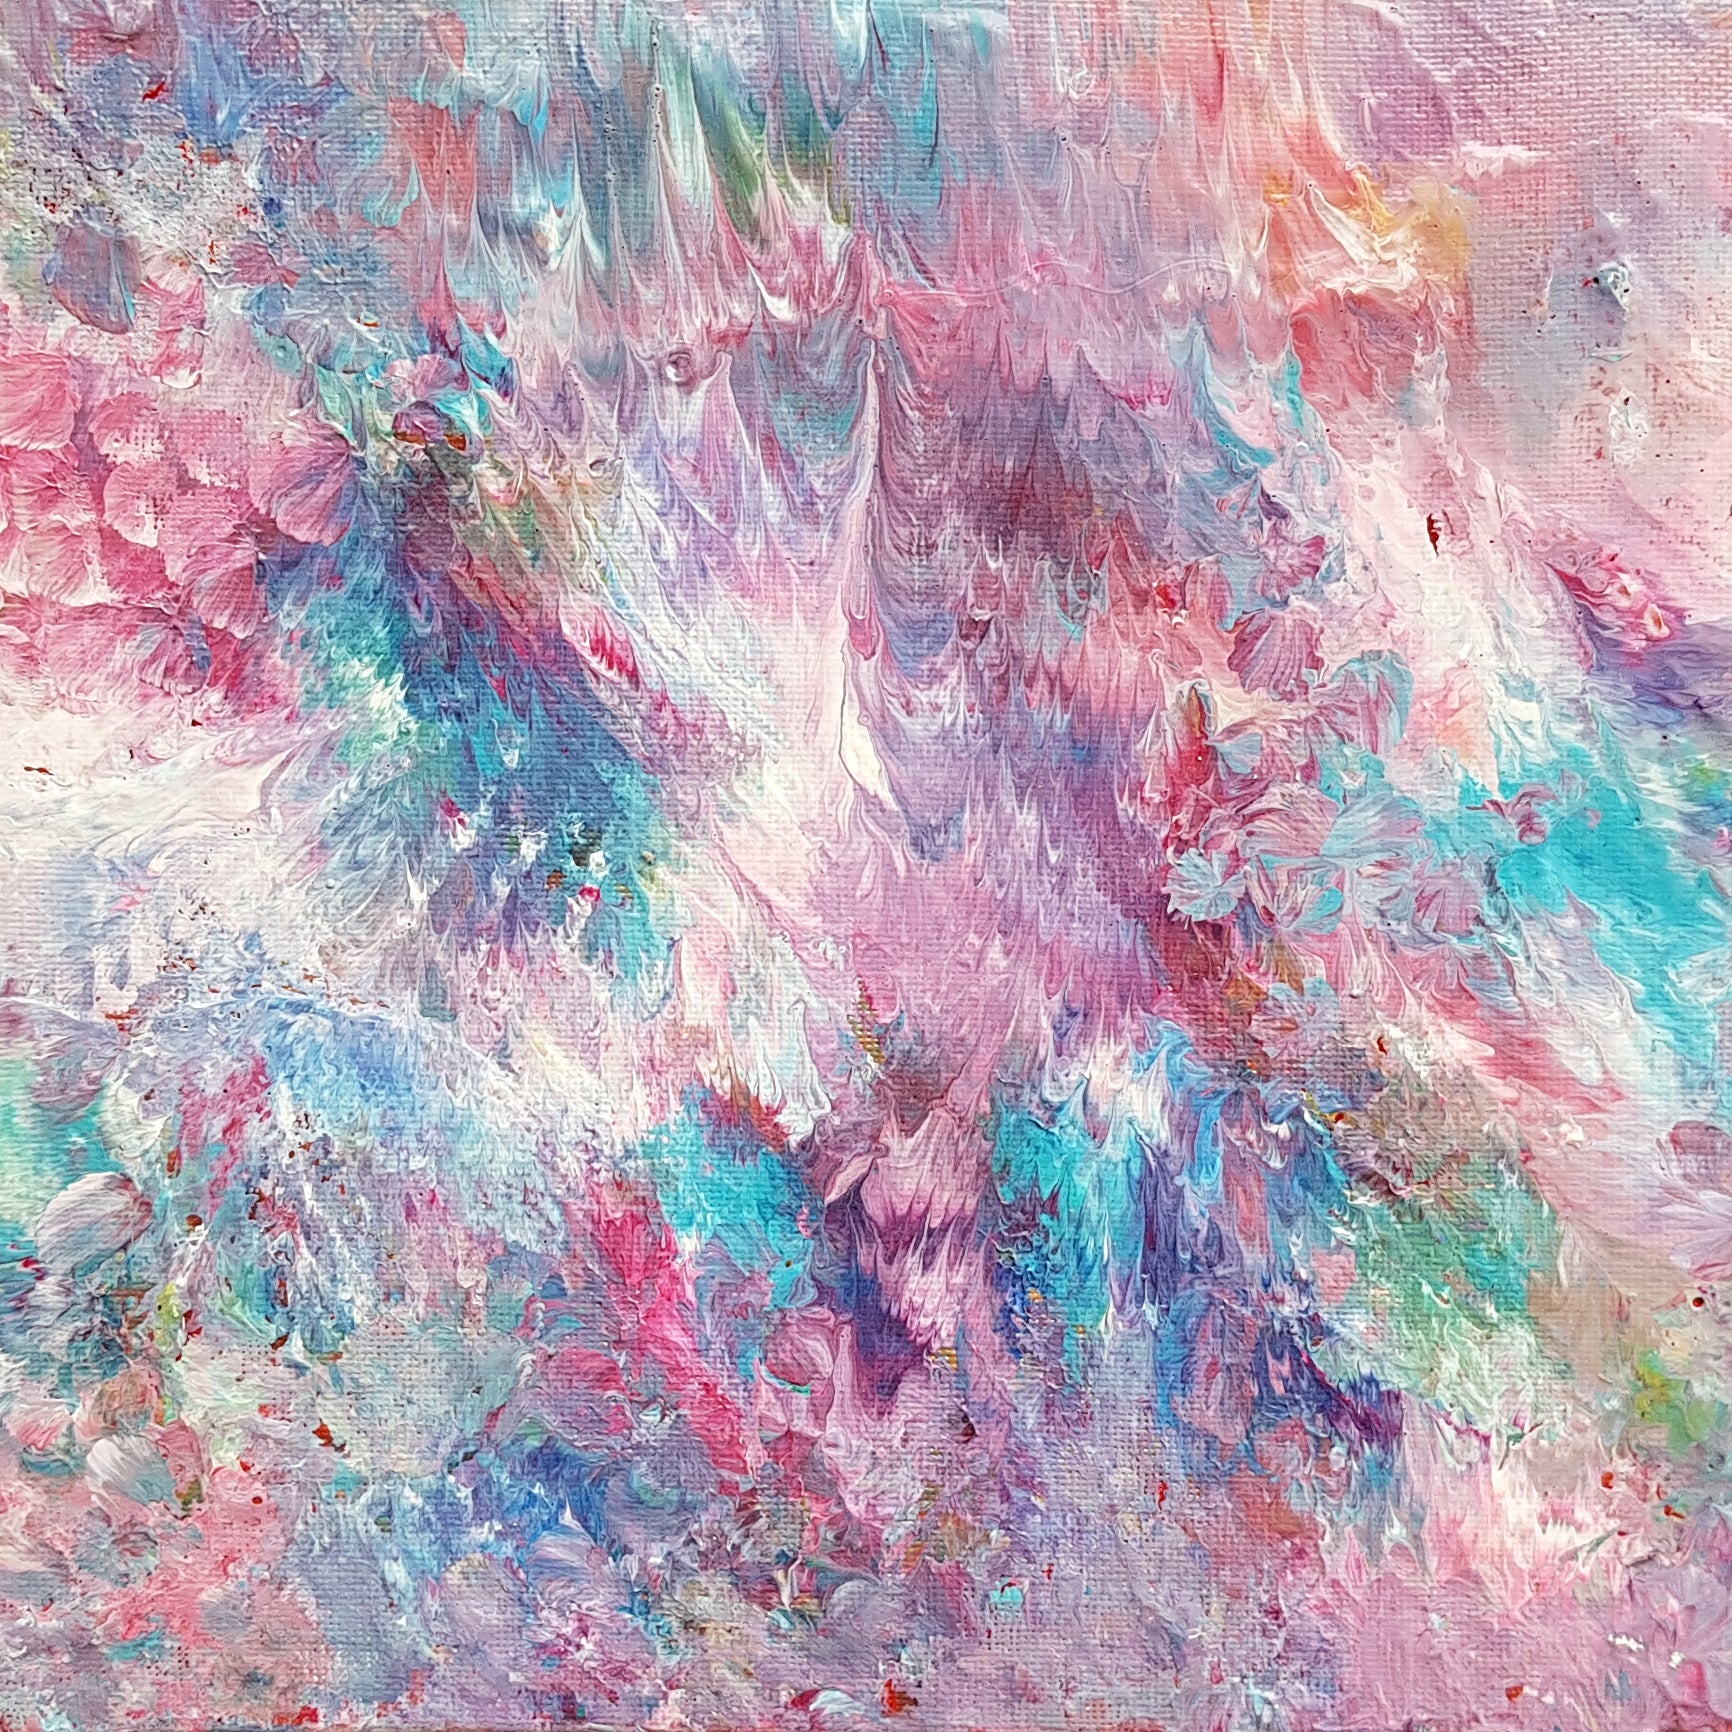 beautiful-spontaneous-abstract-expressionism-acrylic-painting-pink-purple-blue-white-cloudy-sky-painting